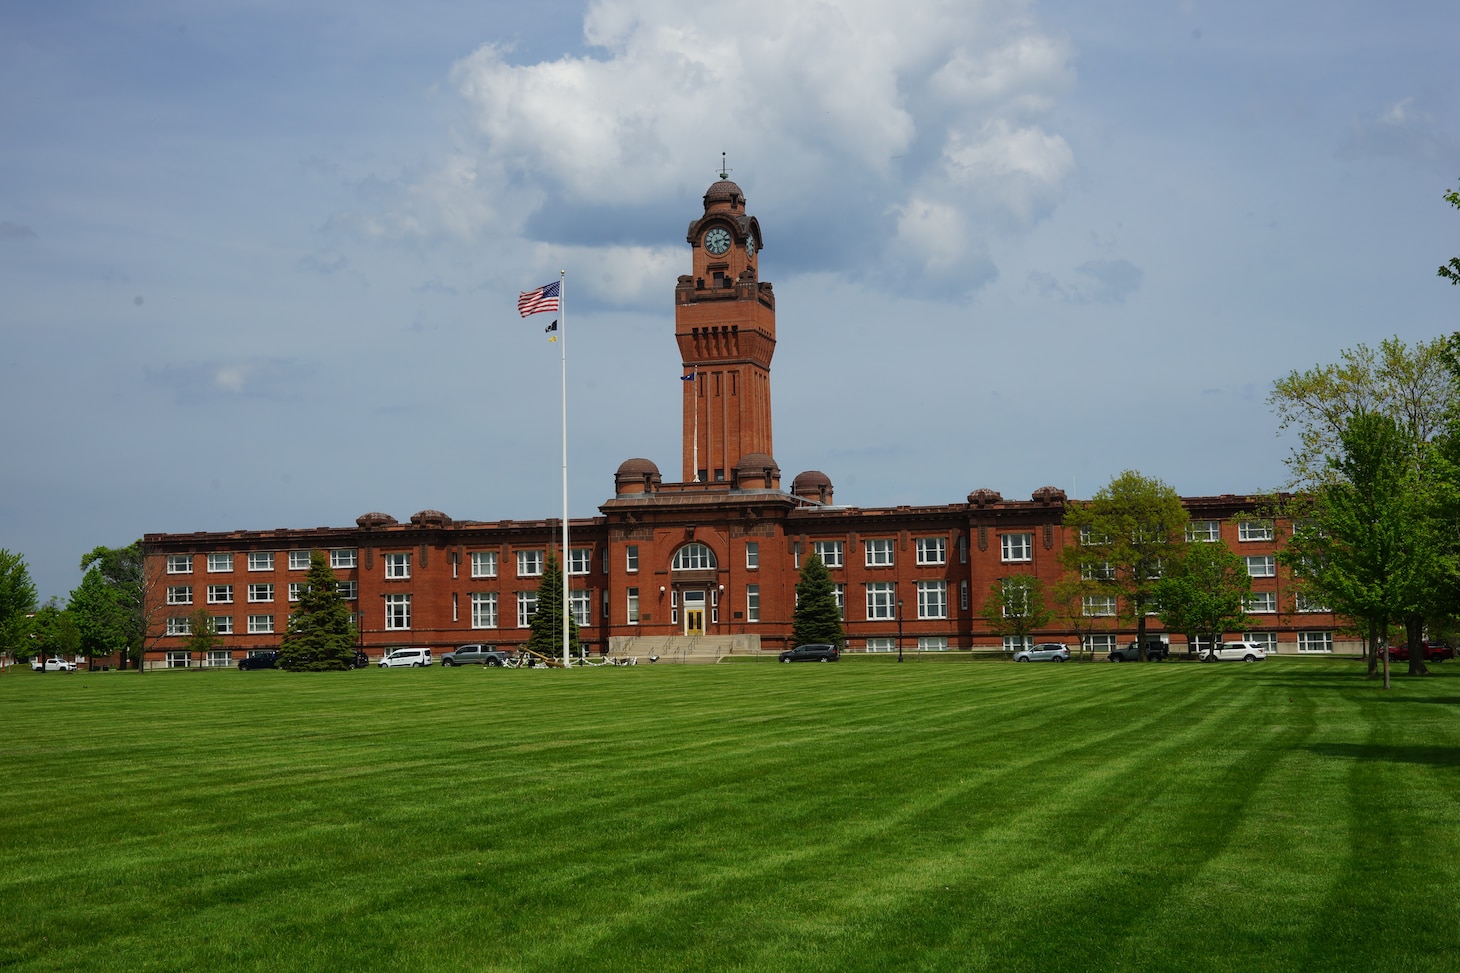 Building 1 is an architectural landmark aboard Naval Station Great Lakes.